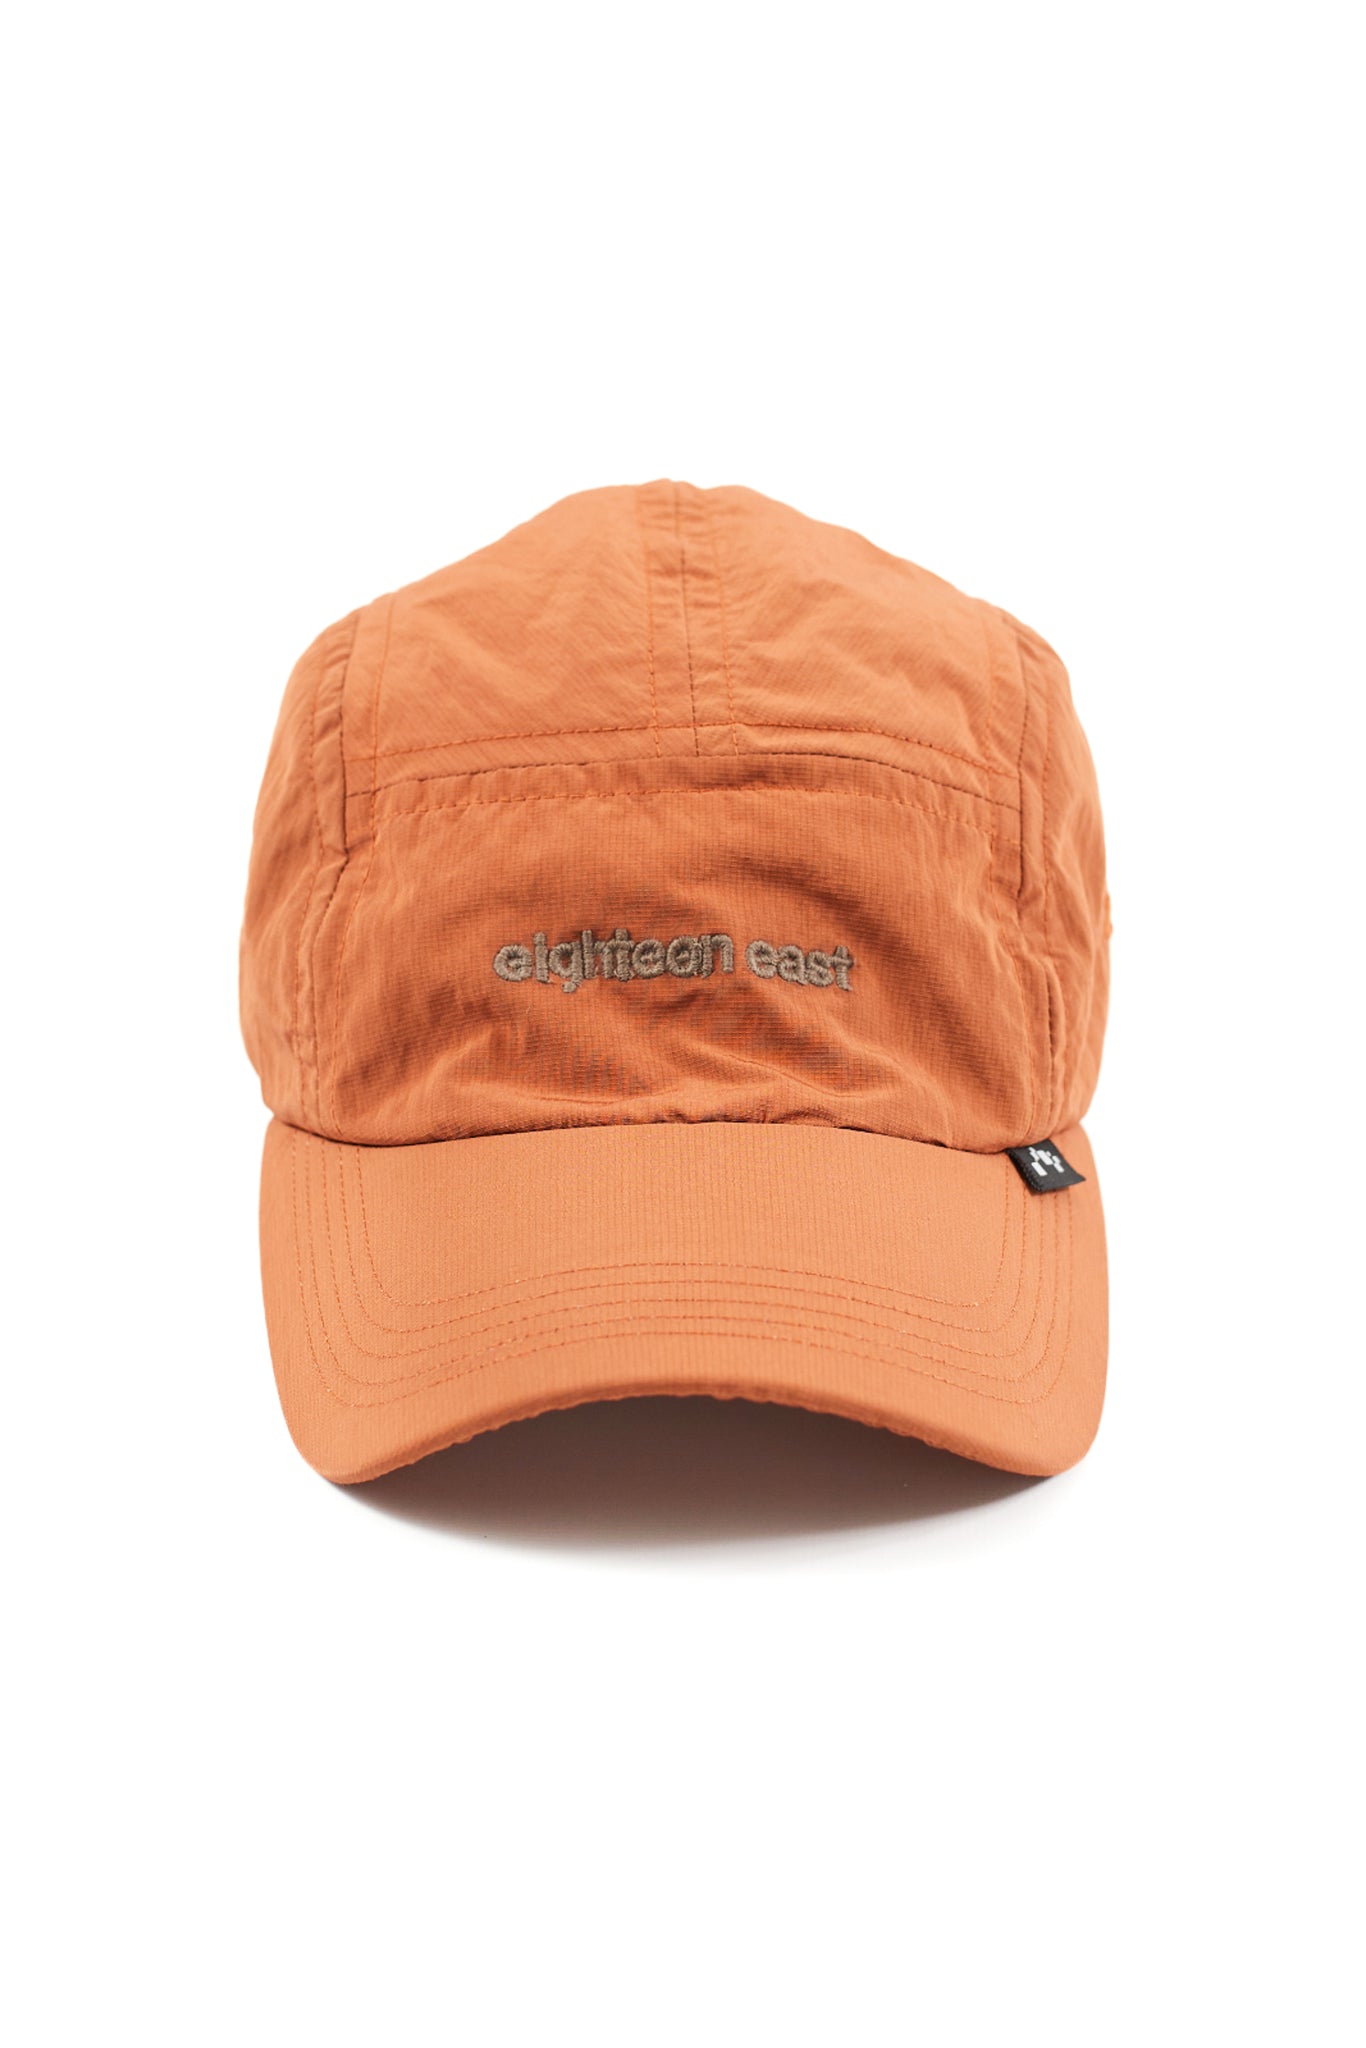 RAINSHADOW OUTDOOR PROTECTION SYSTEM CINCH BACK CAMP HAT - BRICK WATER-REPELLENT MICRO RIPSTOP NYLON